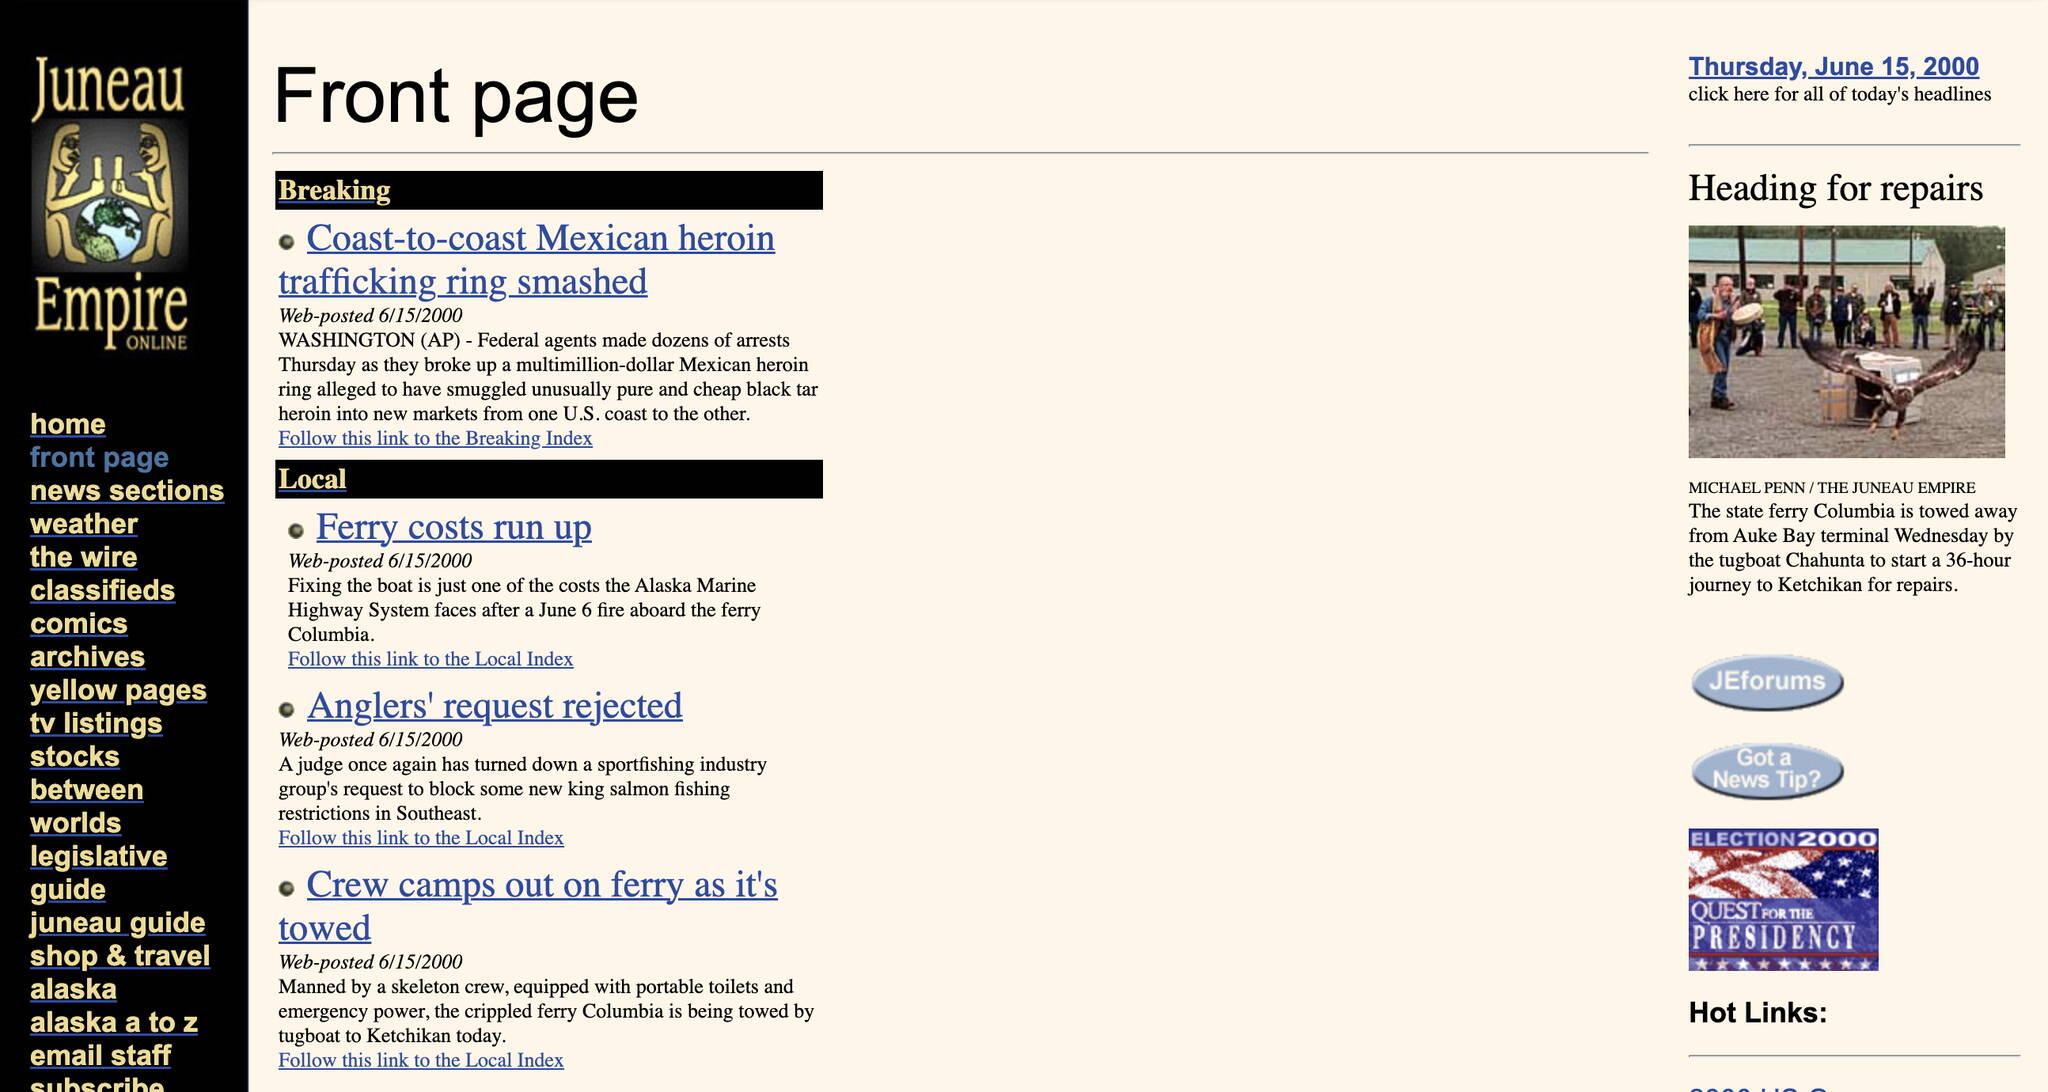 The news homepage of the Juneau Empire on June 15, 2000, shows that while the layout is cleaner than its debut four years earlier, the content and design elements are largely the same. (Screenshot of juneauempire.com from the Internet Archive)